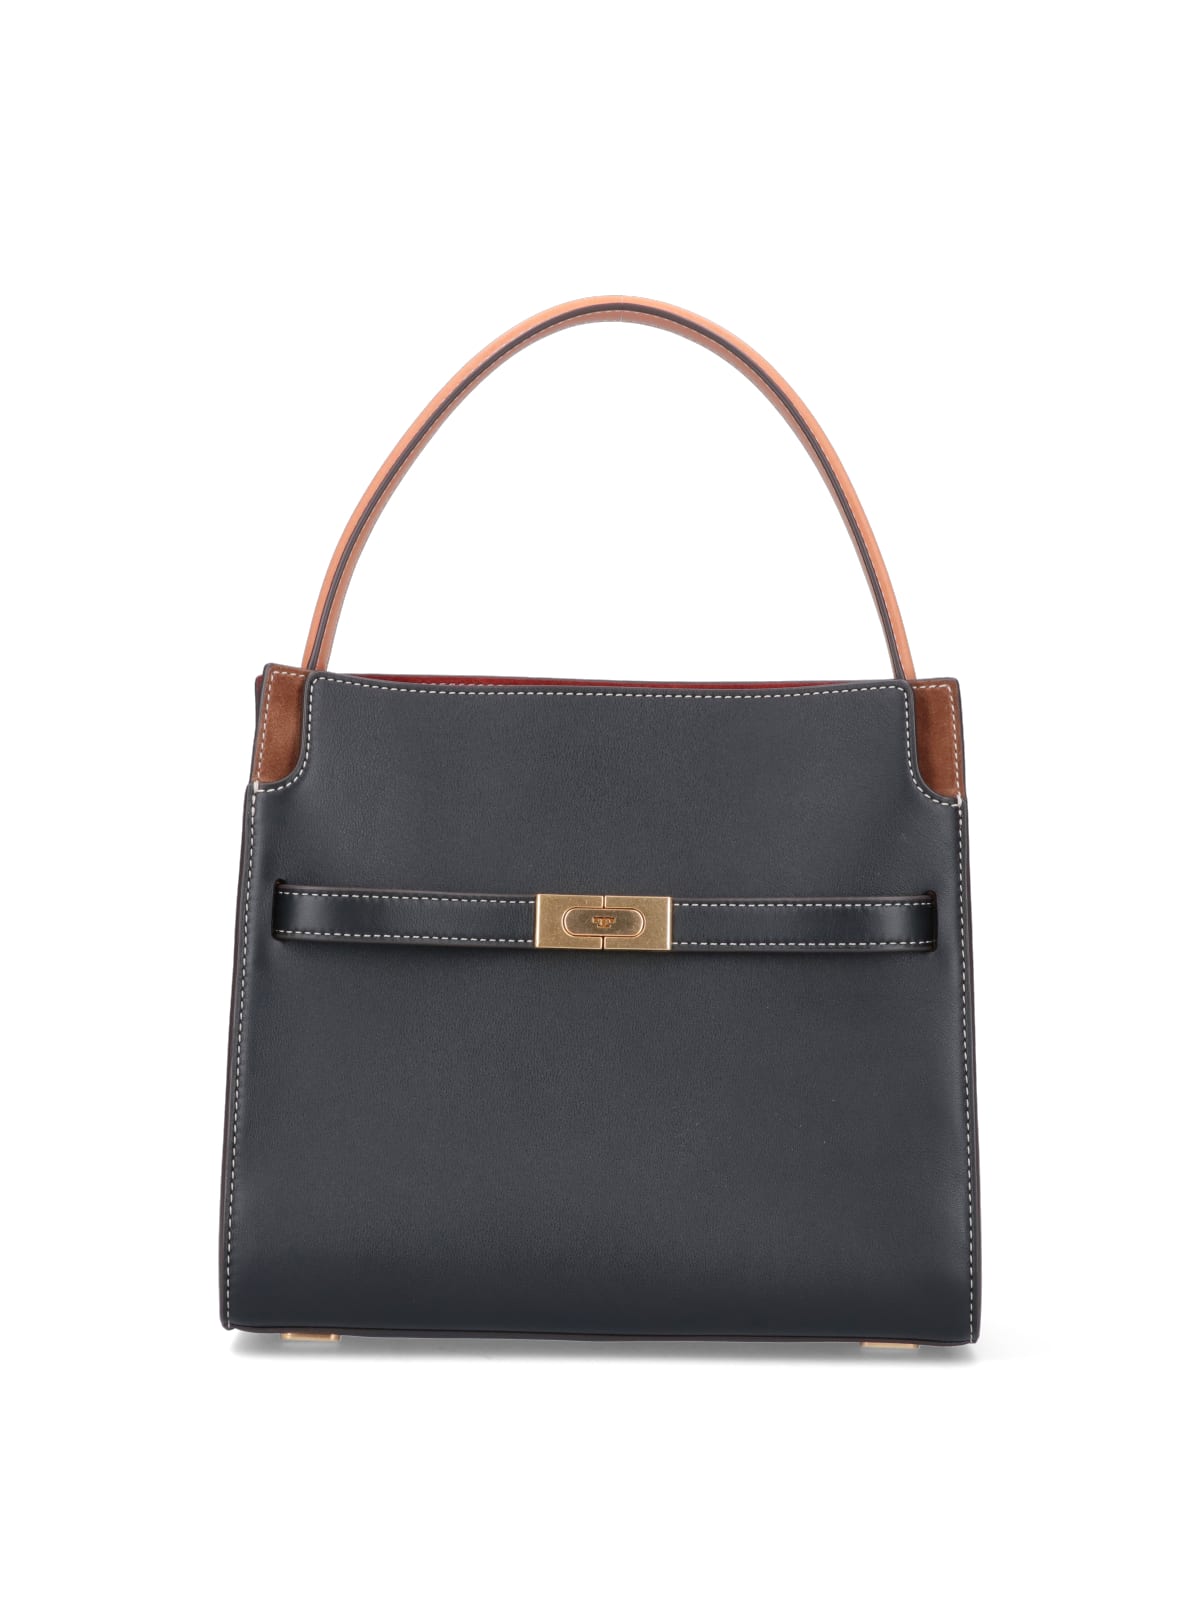 Shop Tory Burch Small Double Lee Radziwill Bag In Black